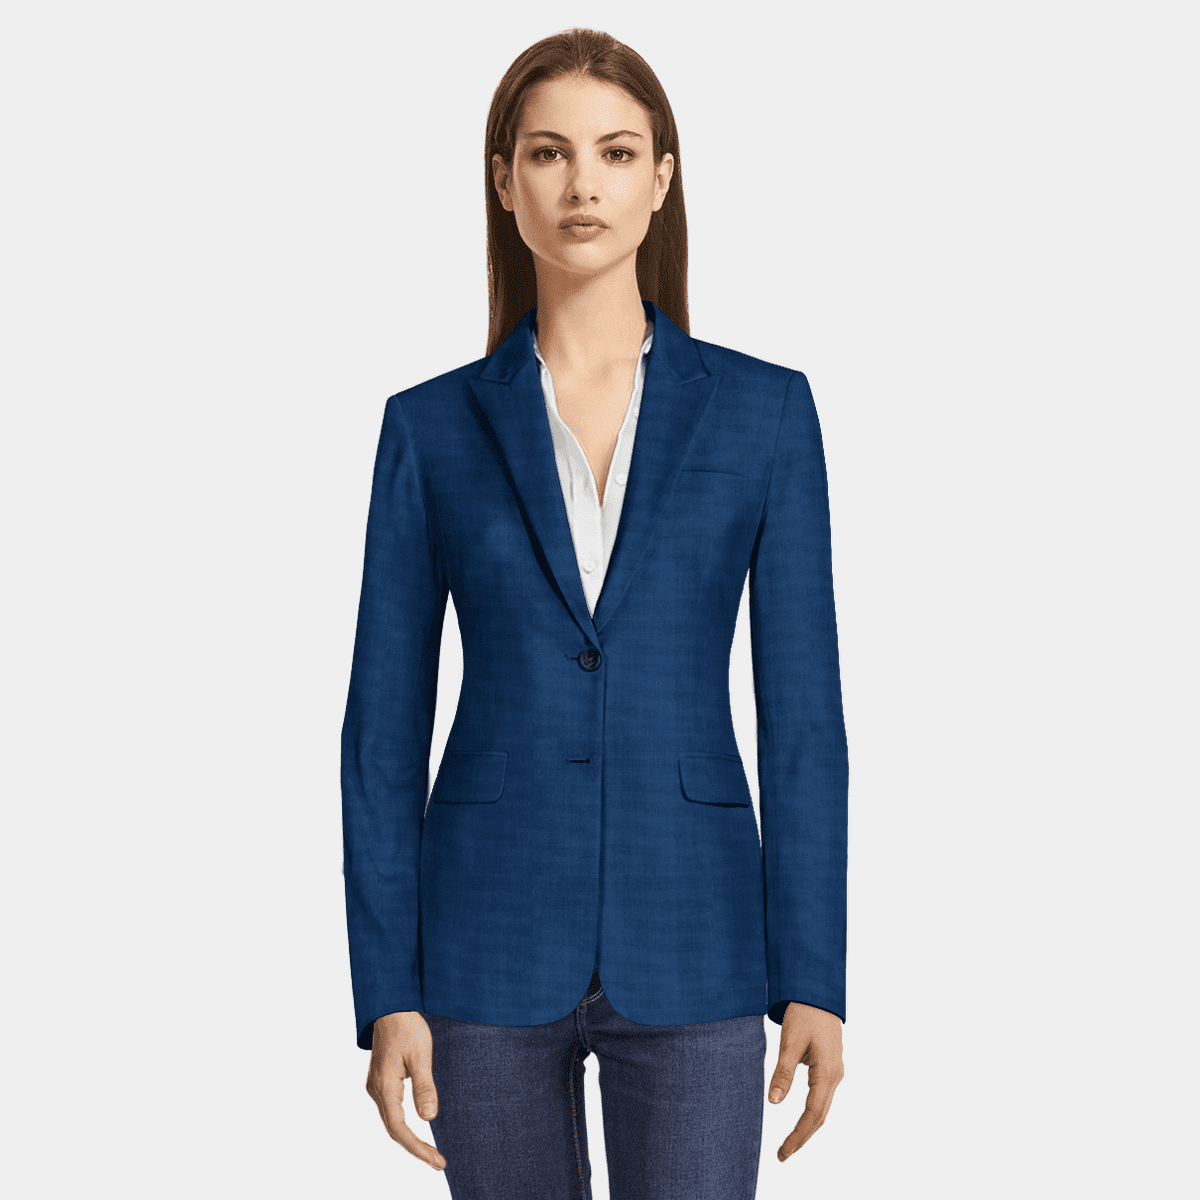 Light Blue polyester-rayon 3-button Blazer with 3 brass buttons